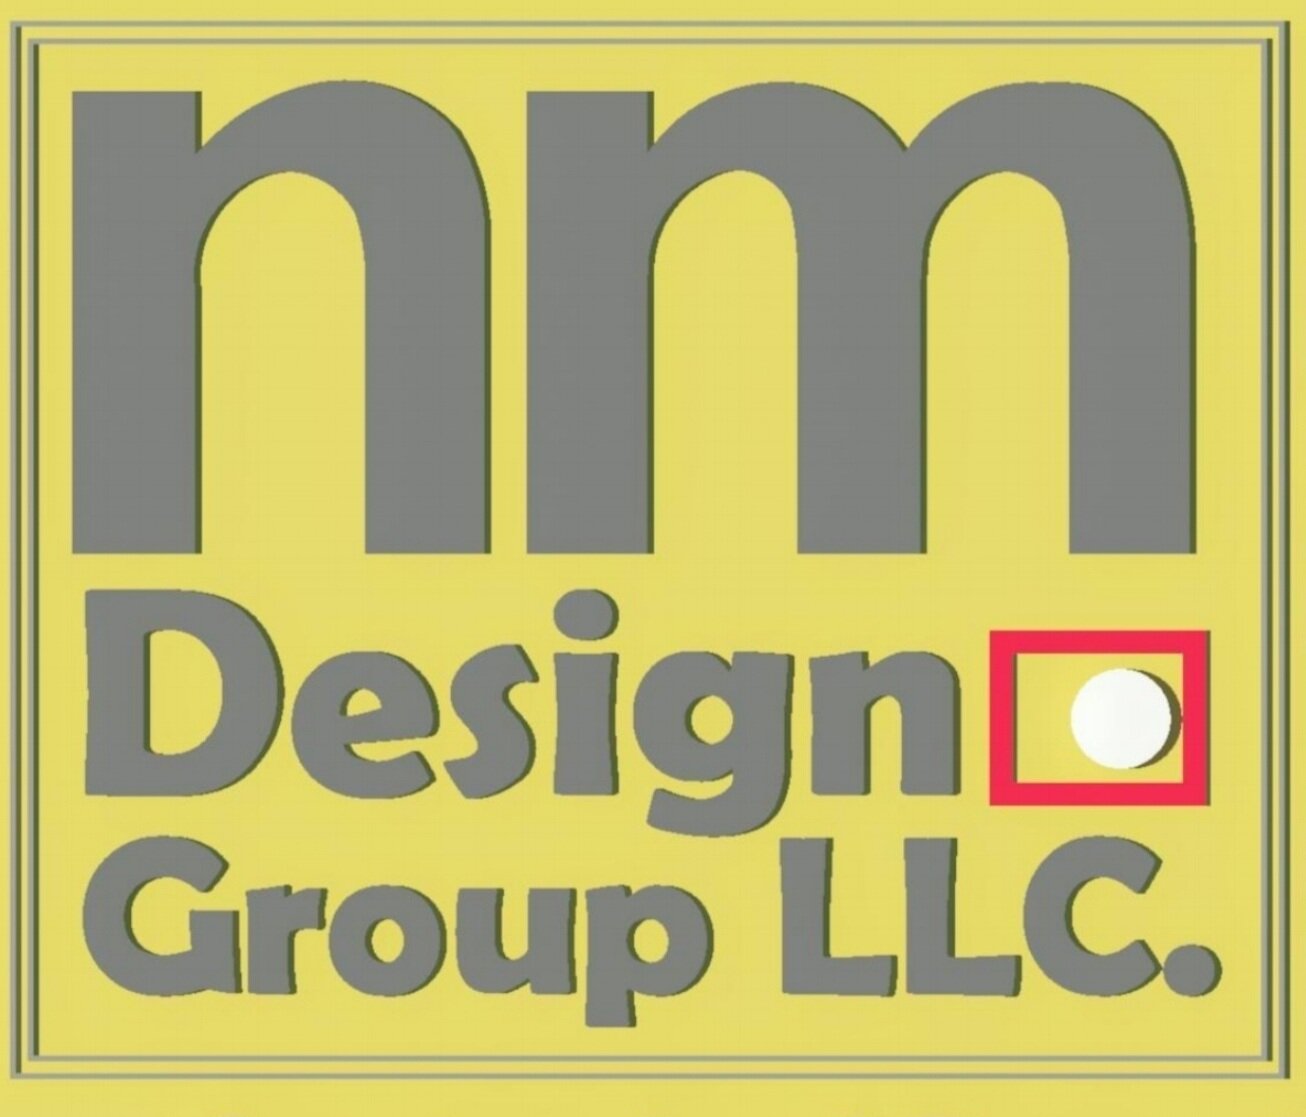 NM Design Group LLC - Tenafly Kitchen Remodeler Boasts as the #1 Kitchen Remodeling Company